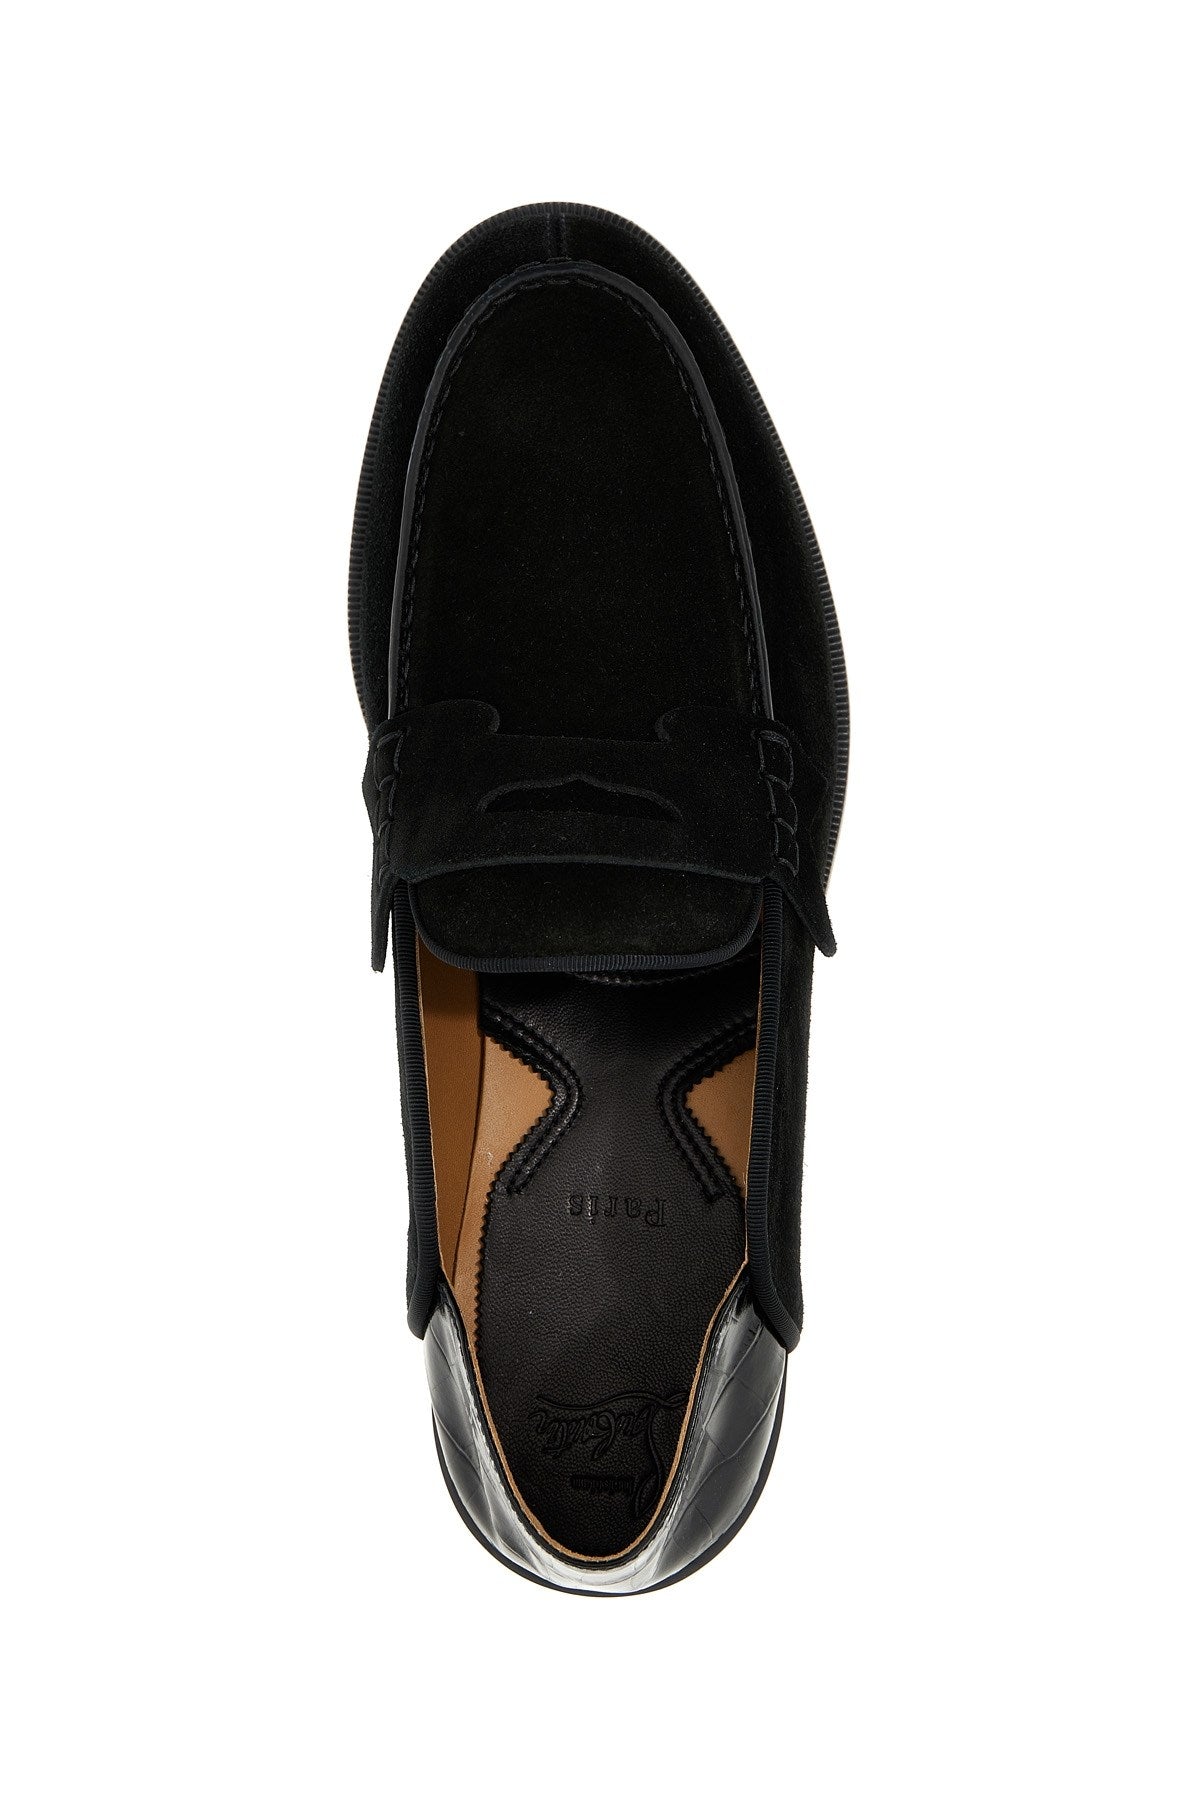 Christian Louboutin Penny No Back Leather Loafer